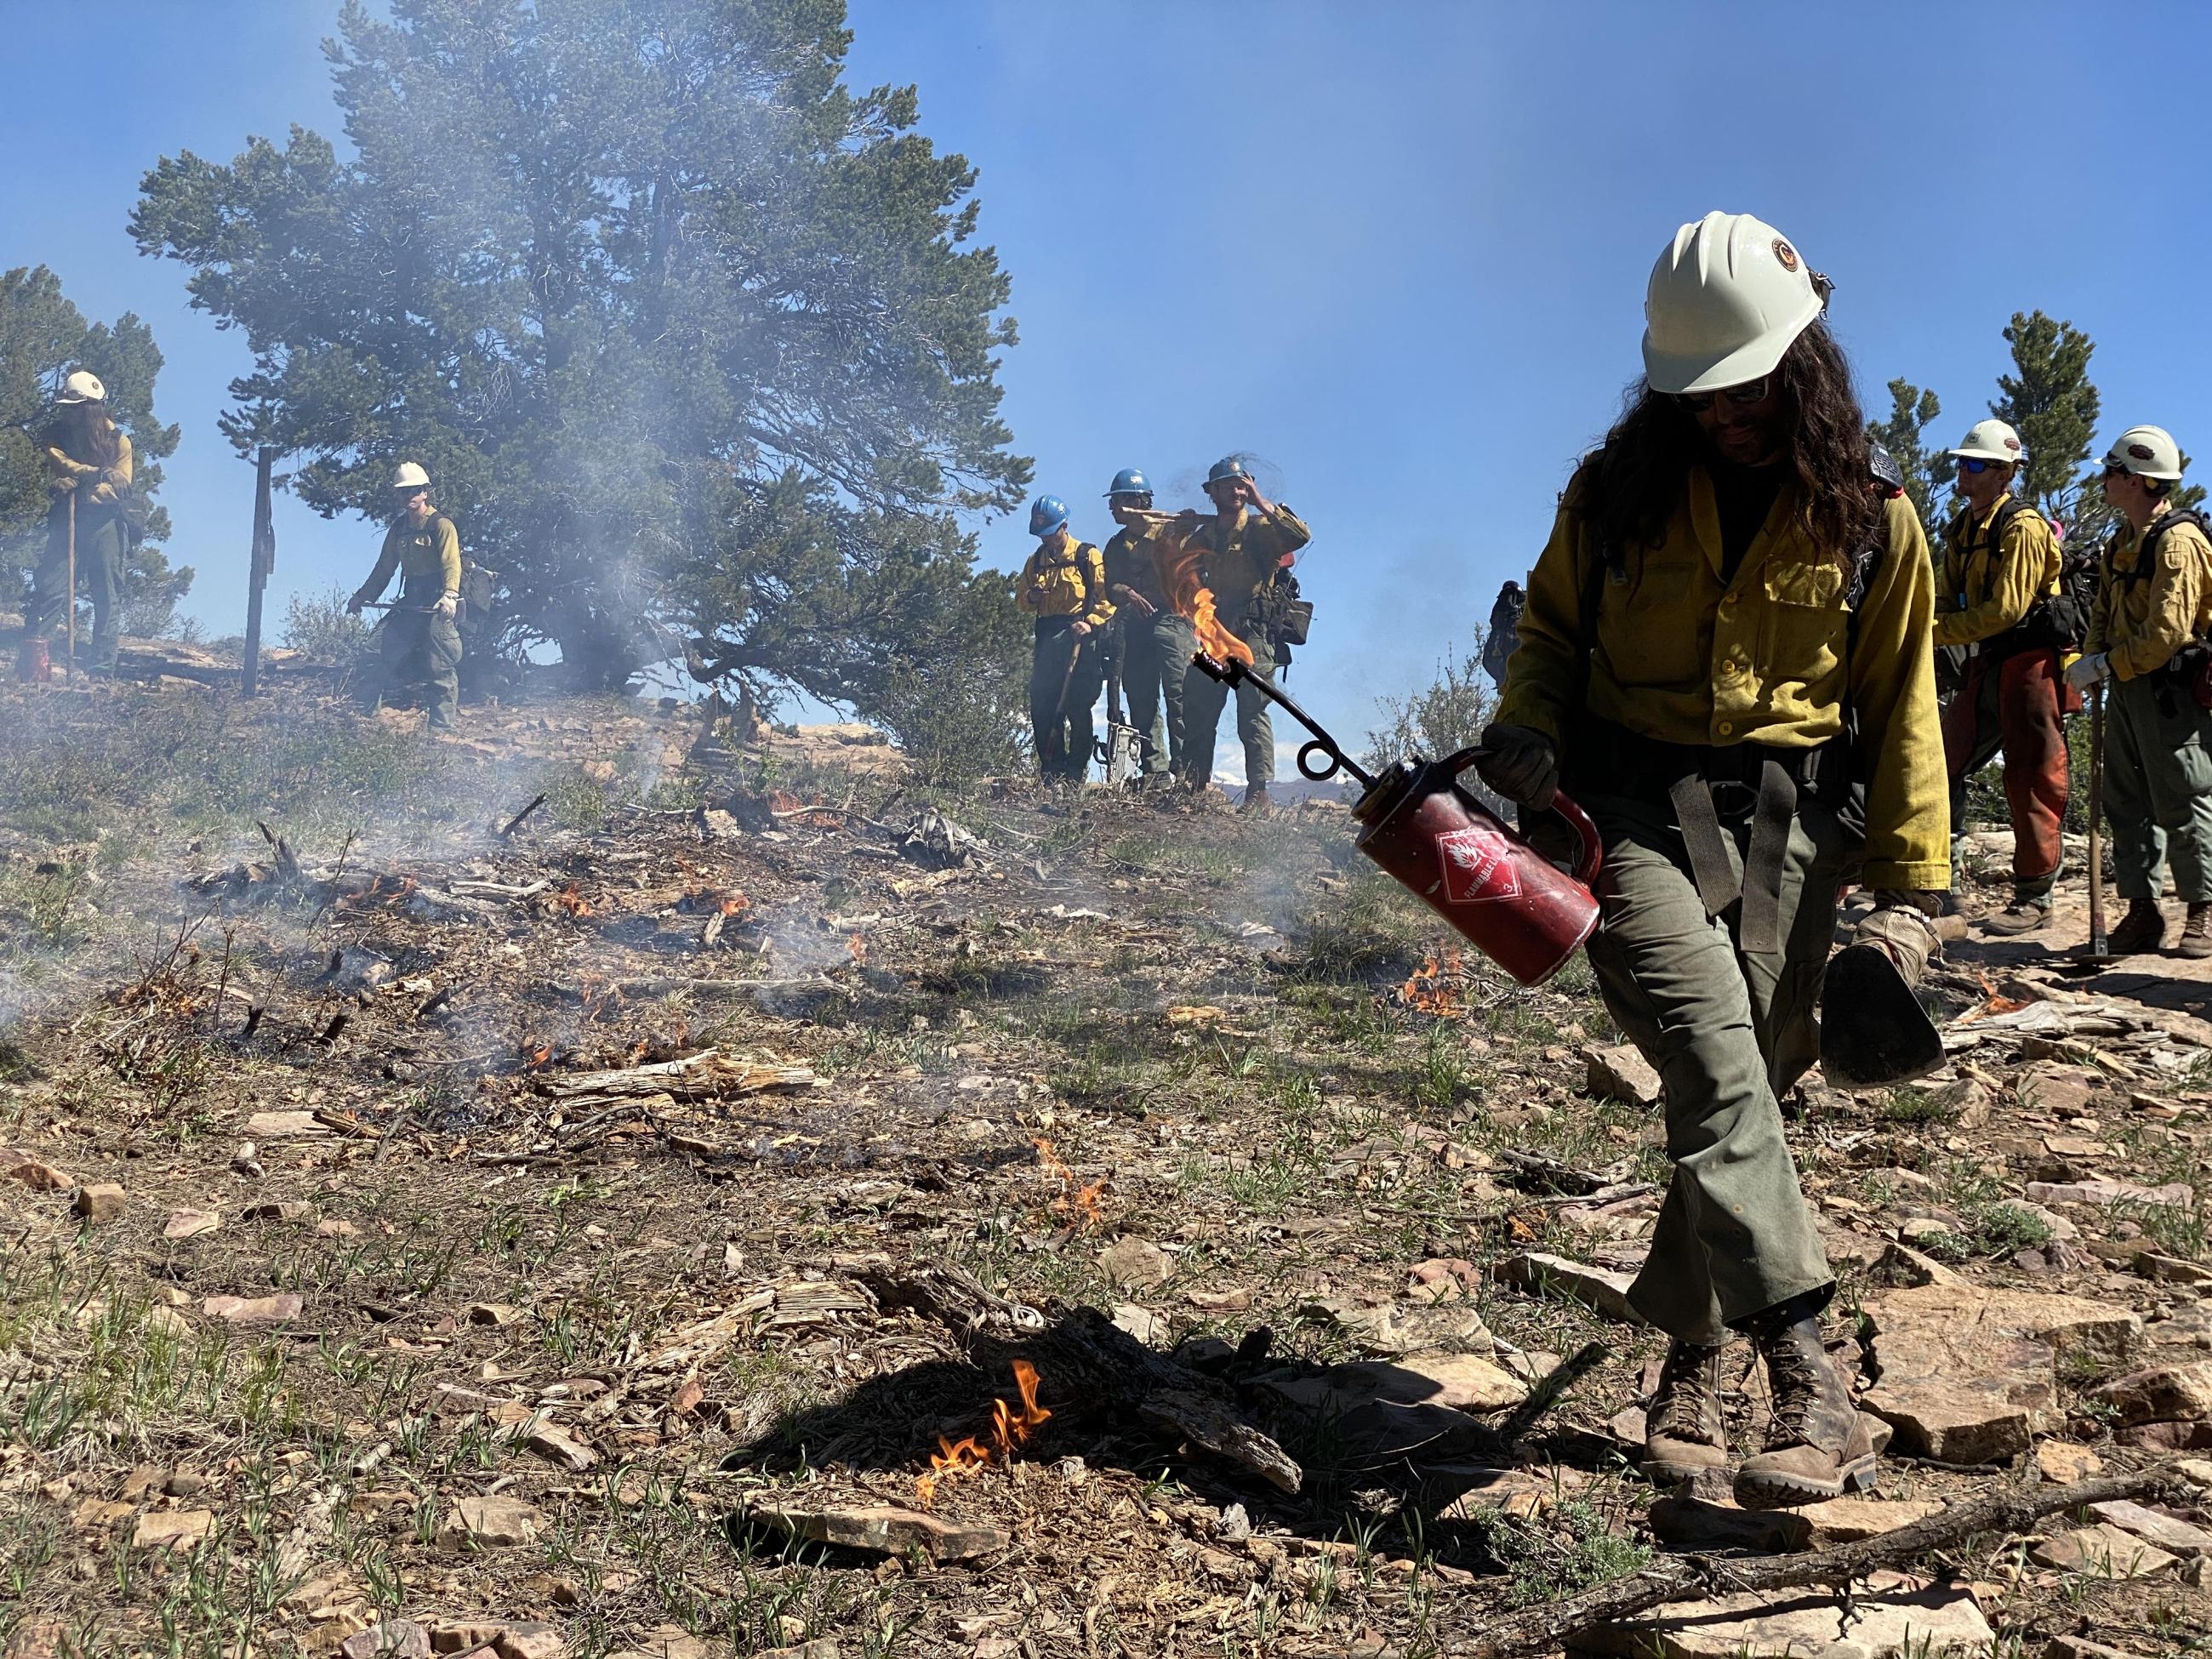 Firefighter holding a red drip torch in the foreground of the photo with a small flame coming out of tip. There are short flames and smoke in front of him. Seven firefighters holding in the background with packs on and tools in their hands, all wearing green pants, yellow shirts, and hardhats. 